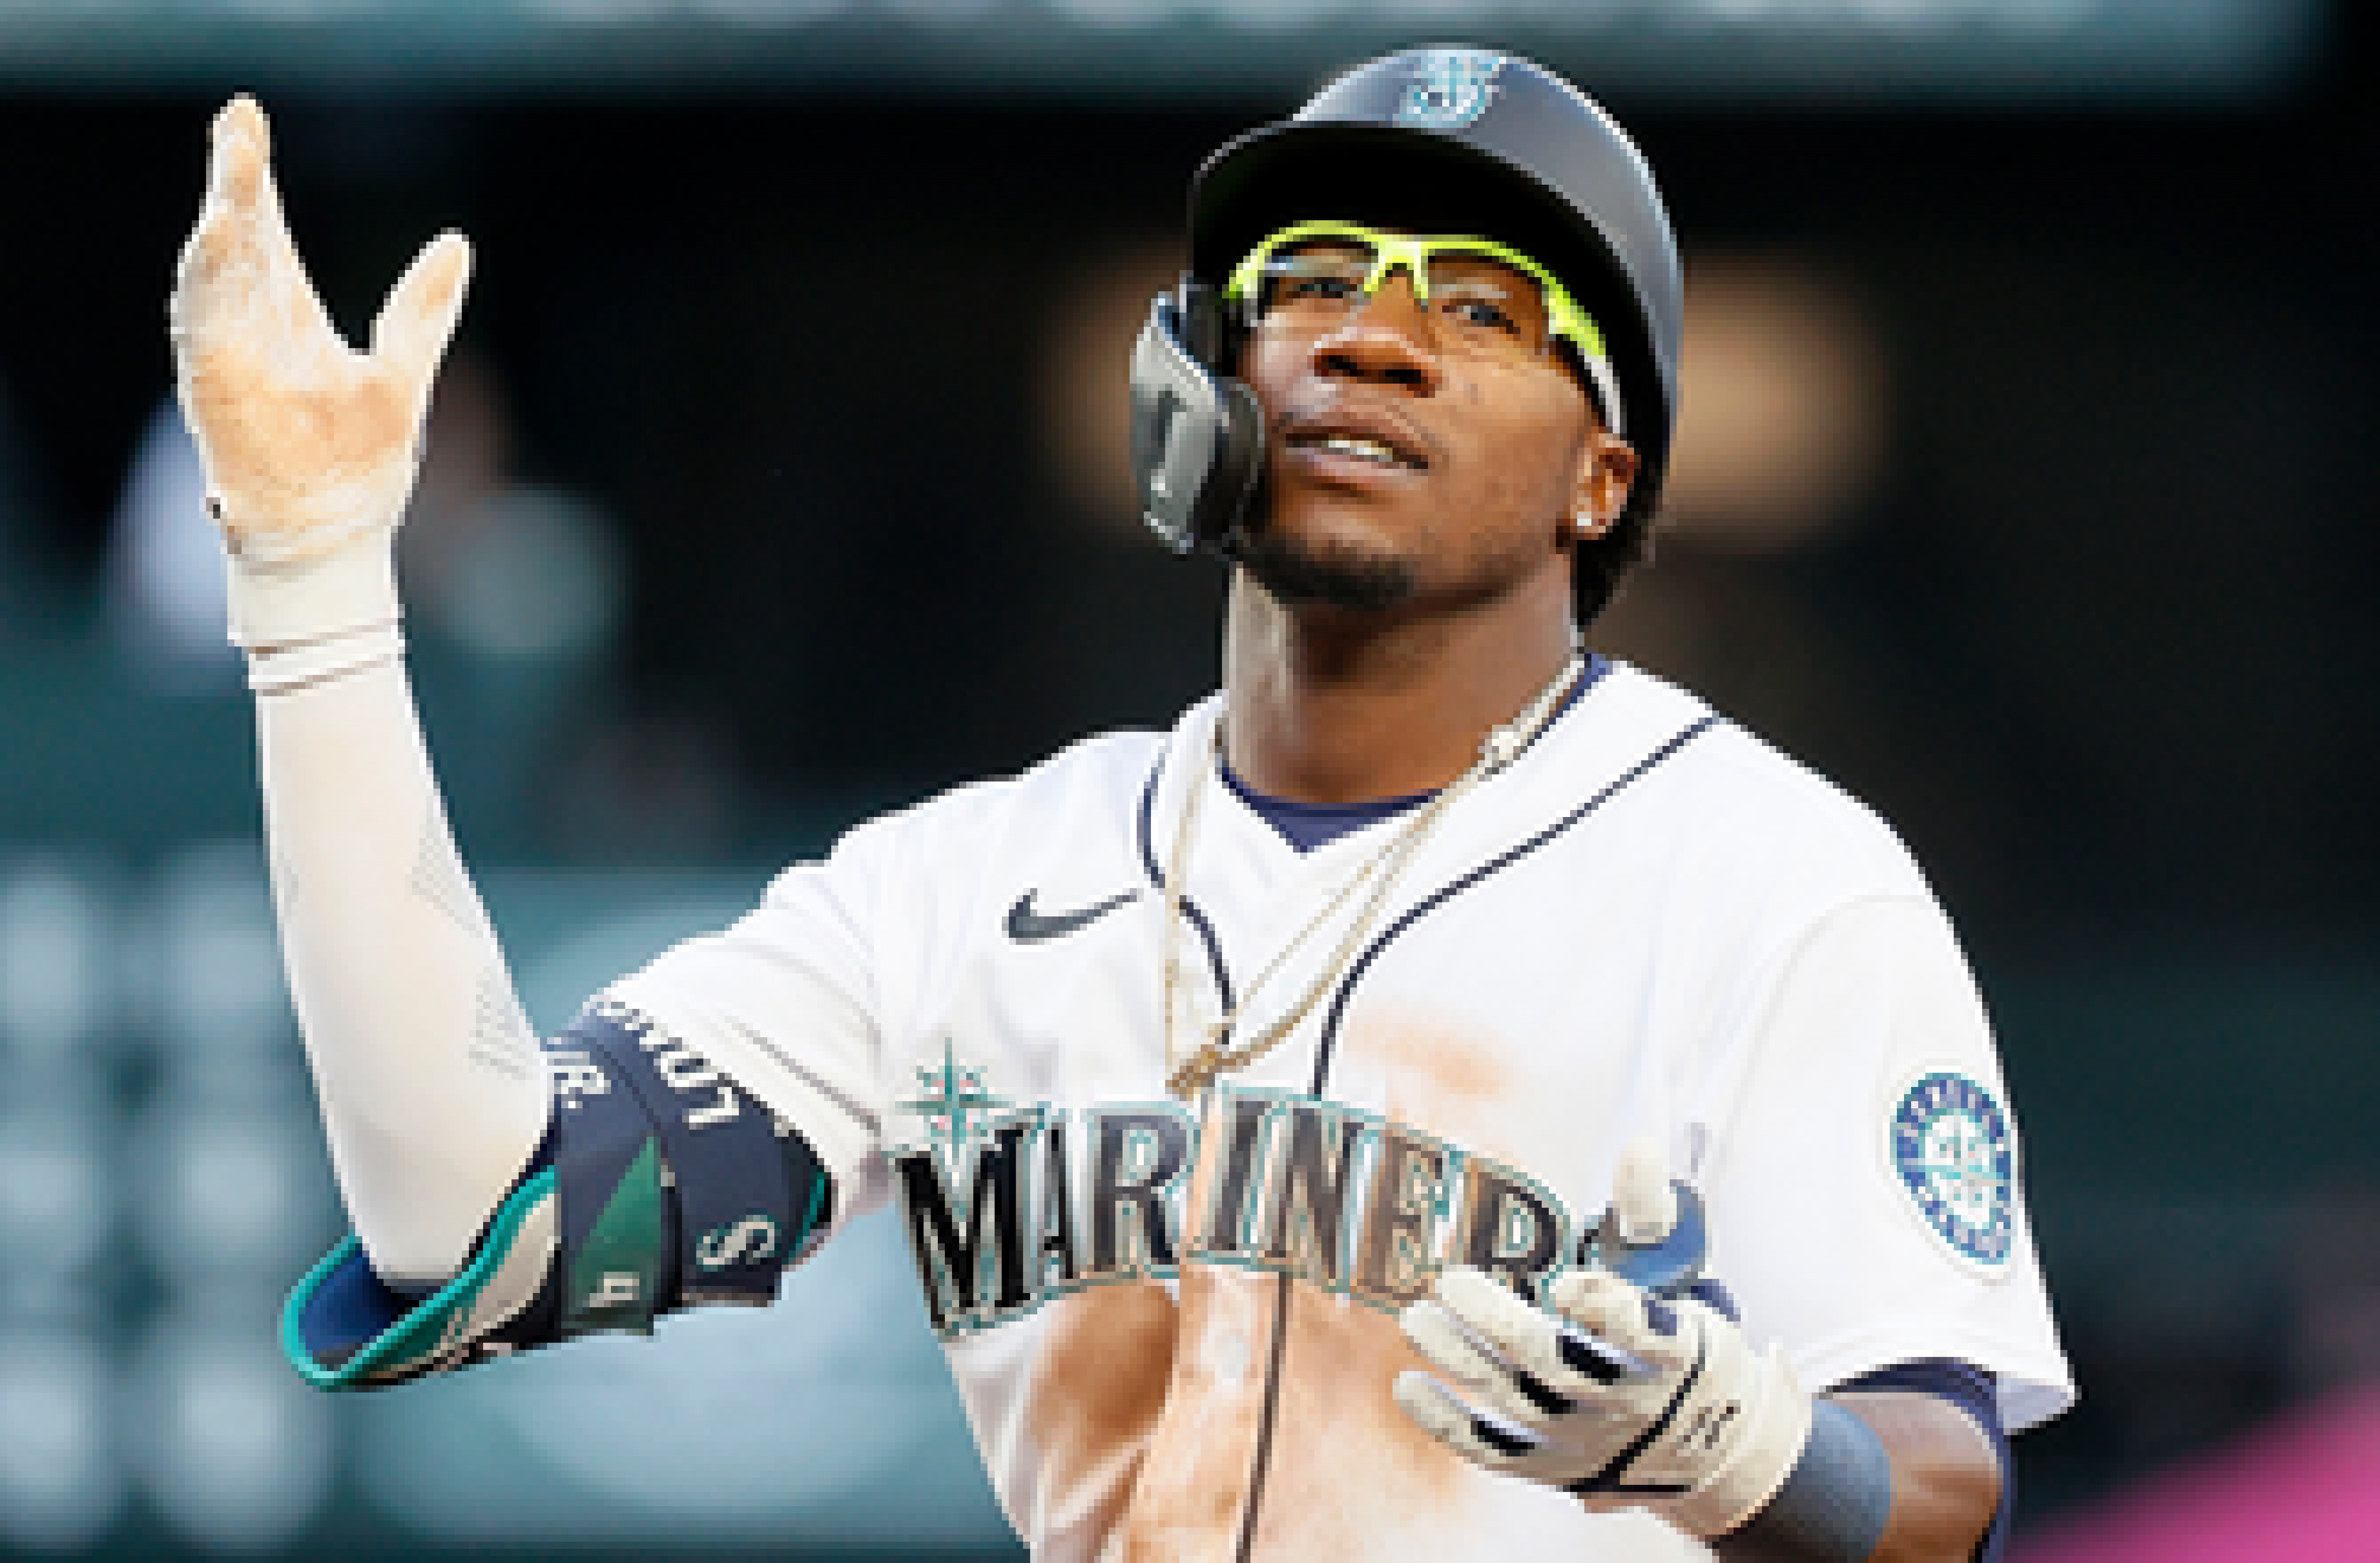 Shed Long Jr. goes 2-4 with 3 RBI in Mariners’ 10-0 win over Twins